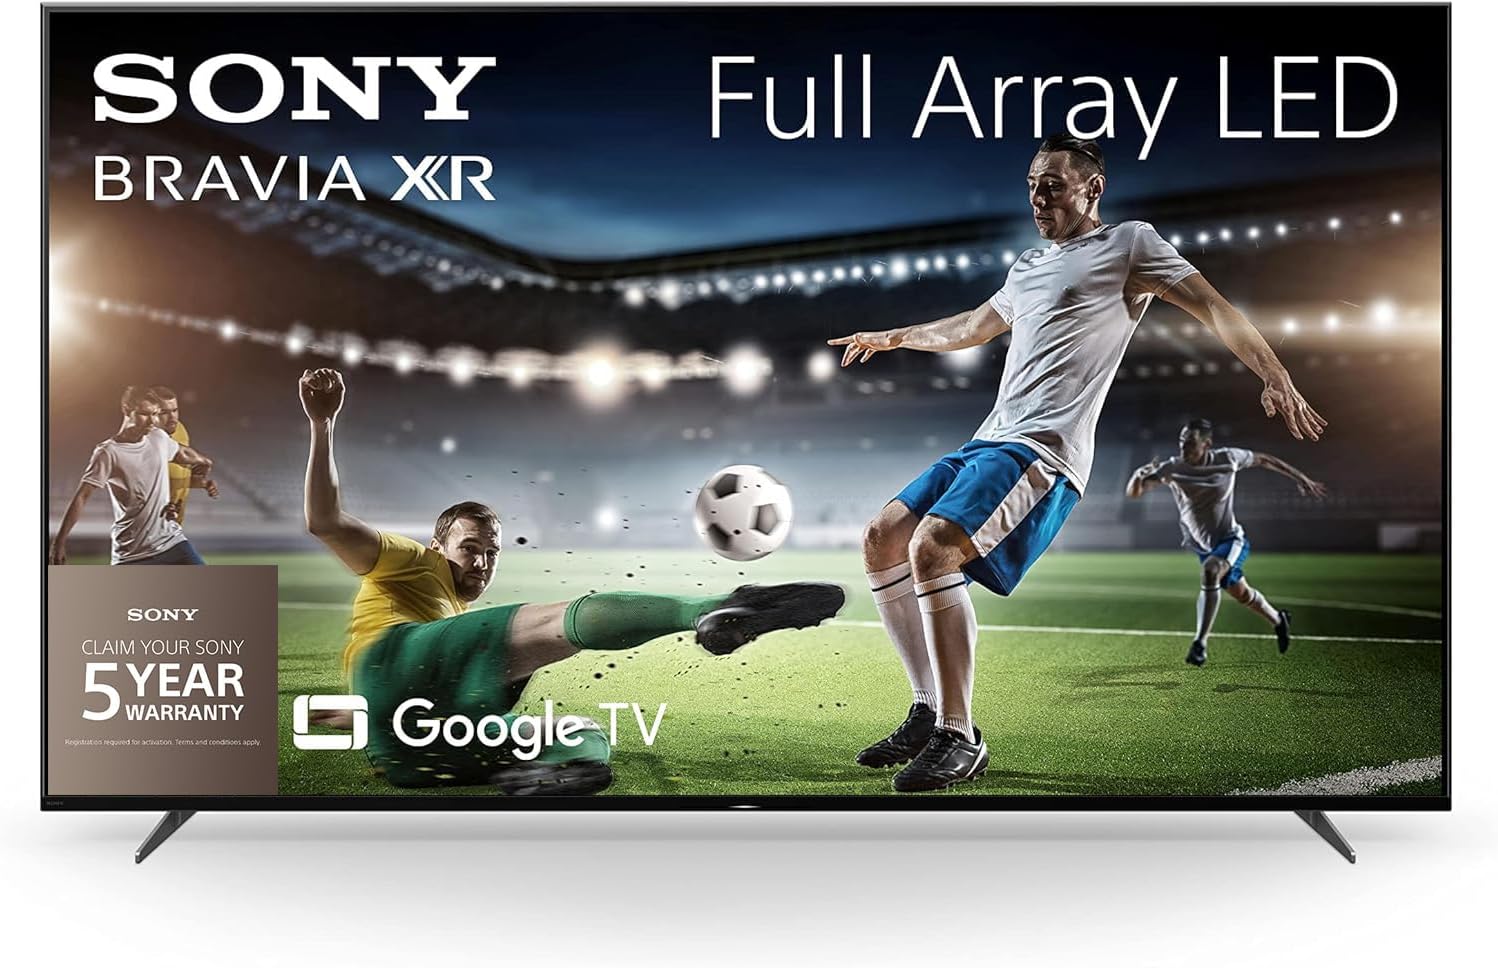 Sony BRAVIA XR, XR - 55X90L, 55 Inch, Full Array LED, Smart TV, 4K HDR, Google TV, ECO PACK, BRAVIA CORE, Perfect for PlayStation5, Aluminium Seamless Edge Design, 5 Year Warranty - Amazing Gadgets Outlet